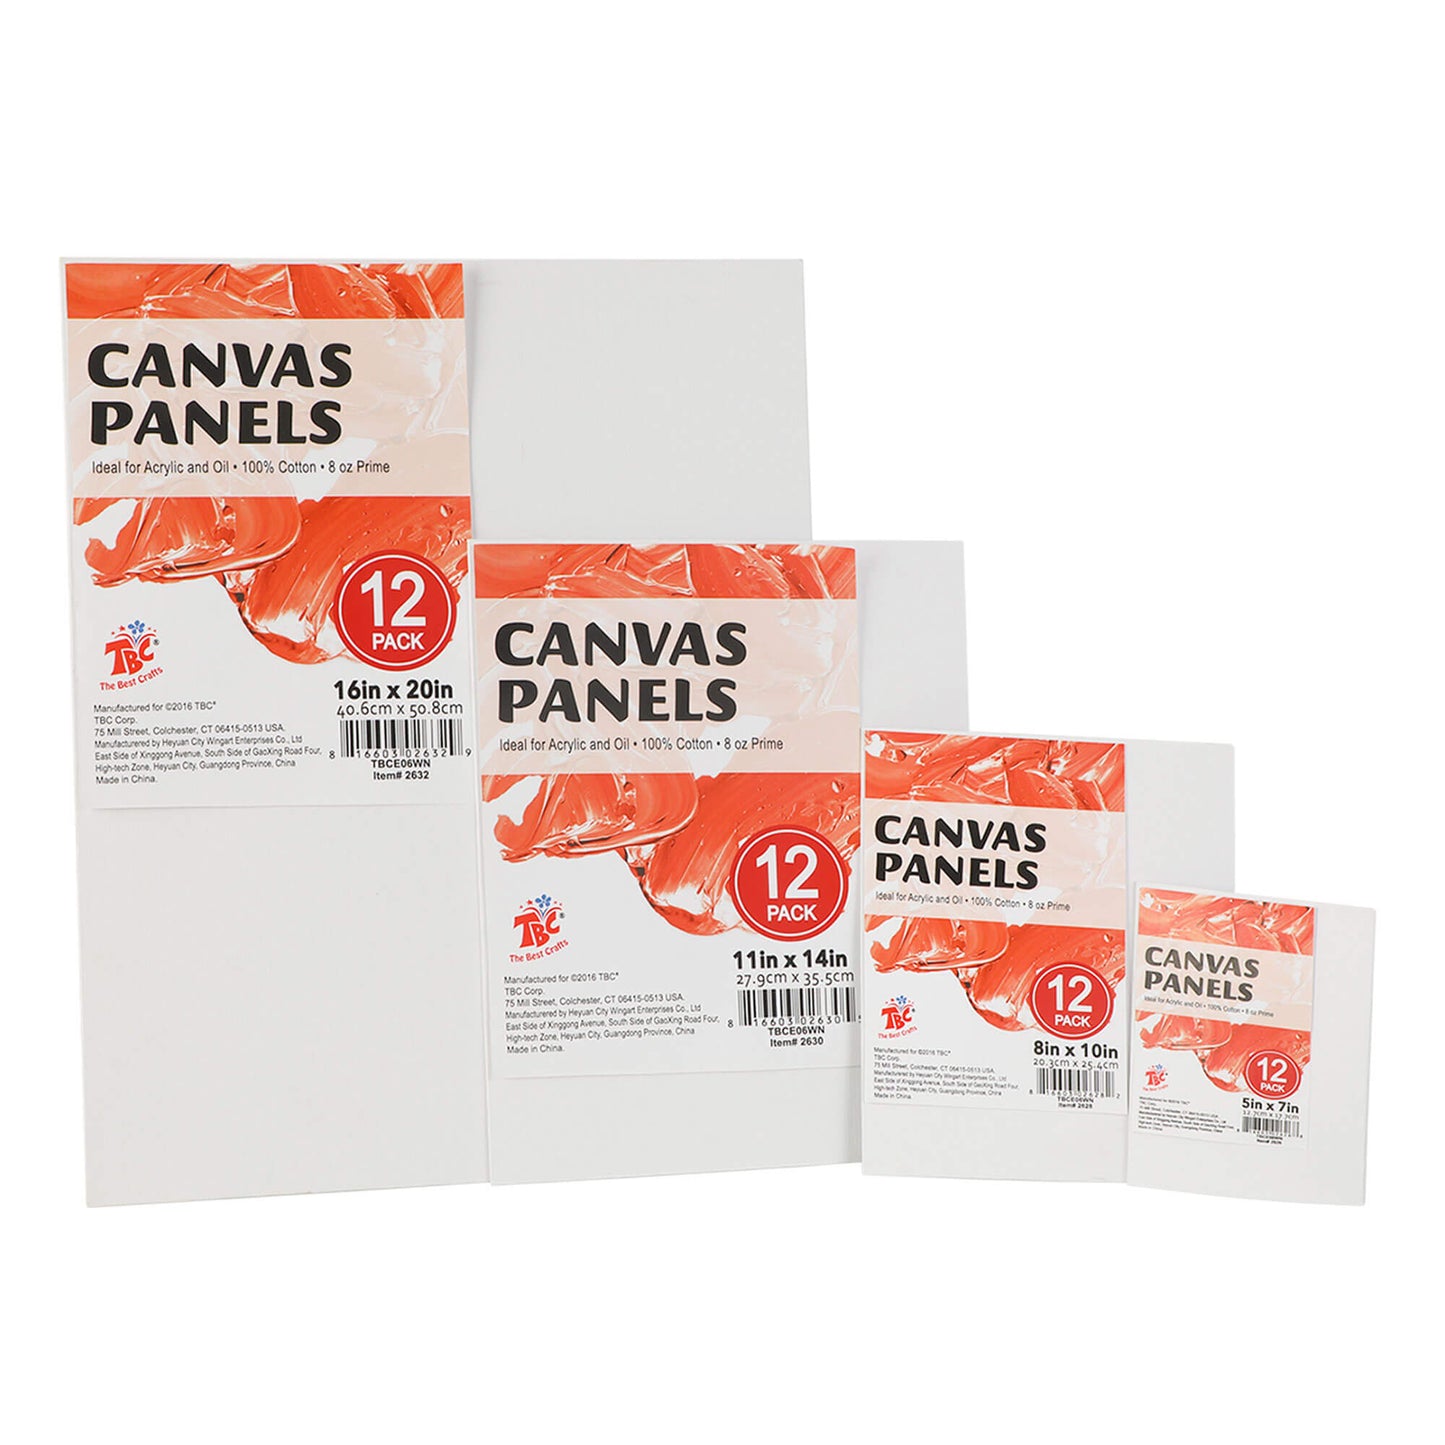 TBC  11" x 14" White Canvas Panels - Pack of 12